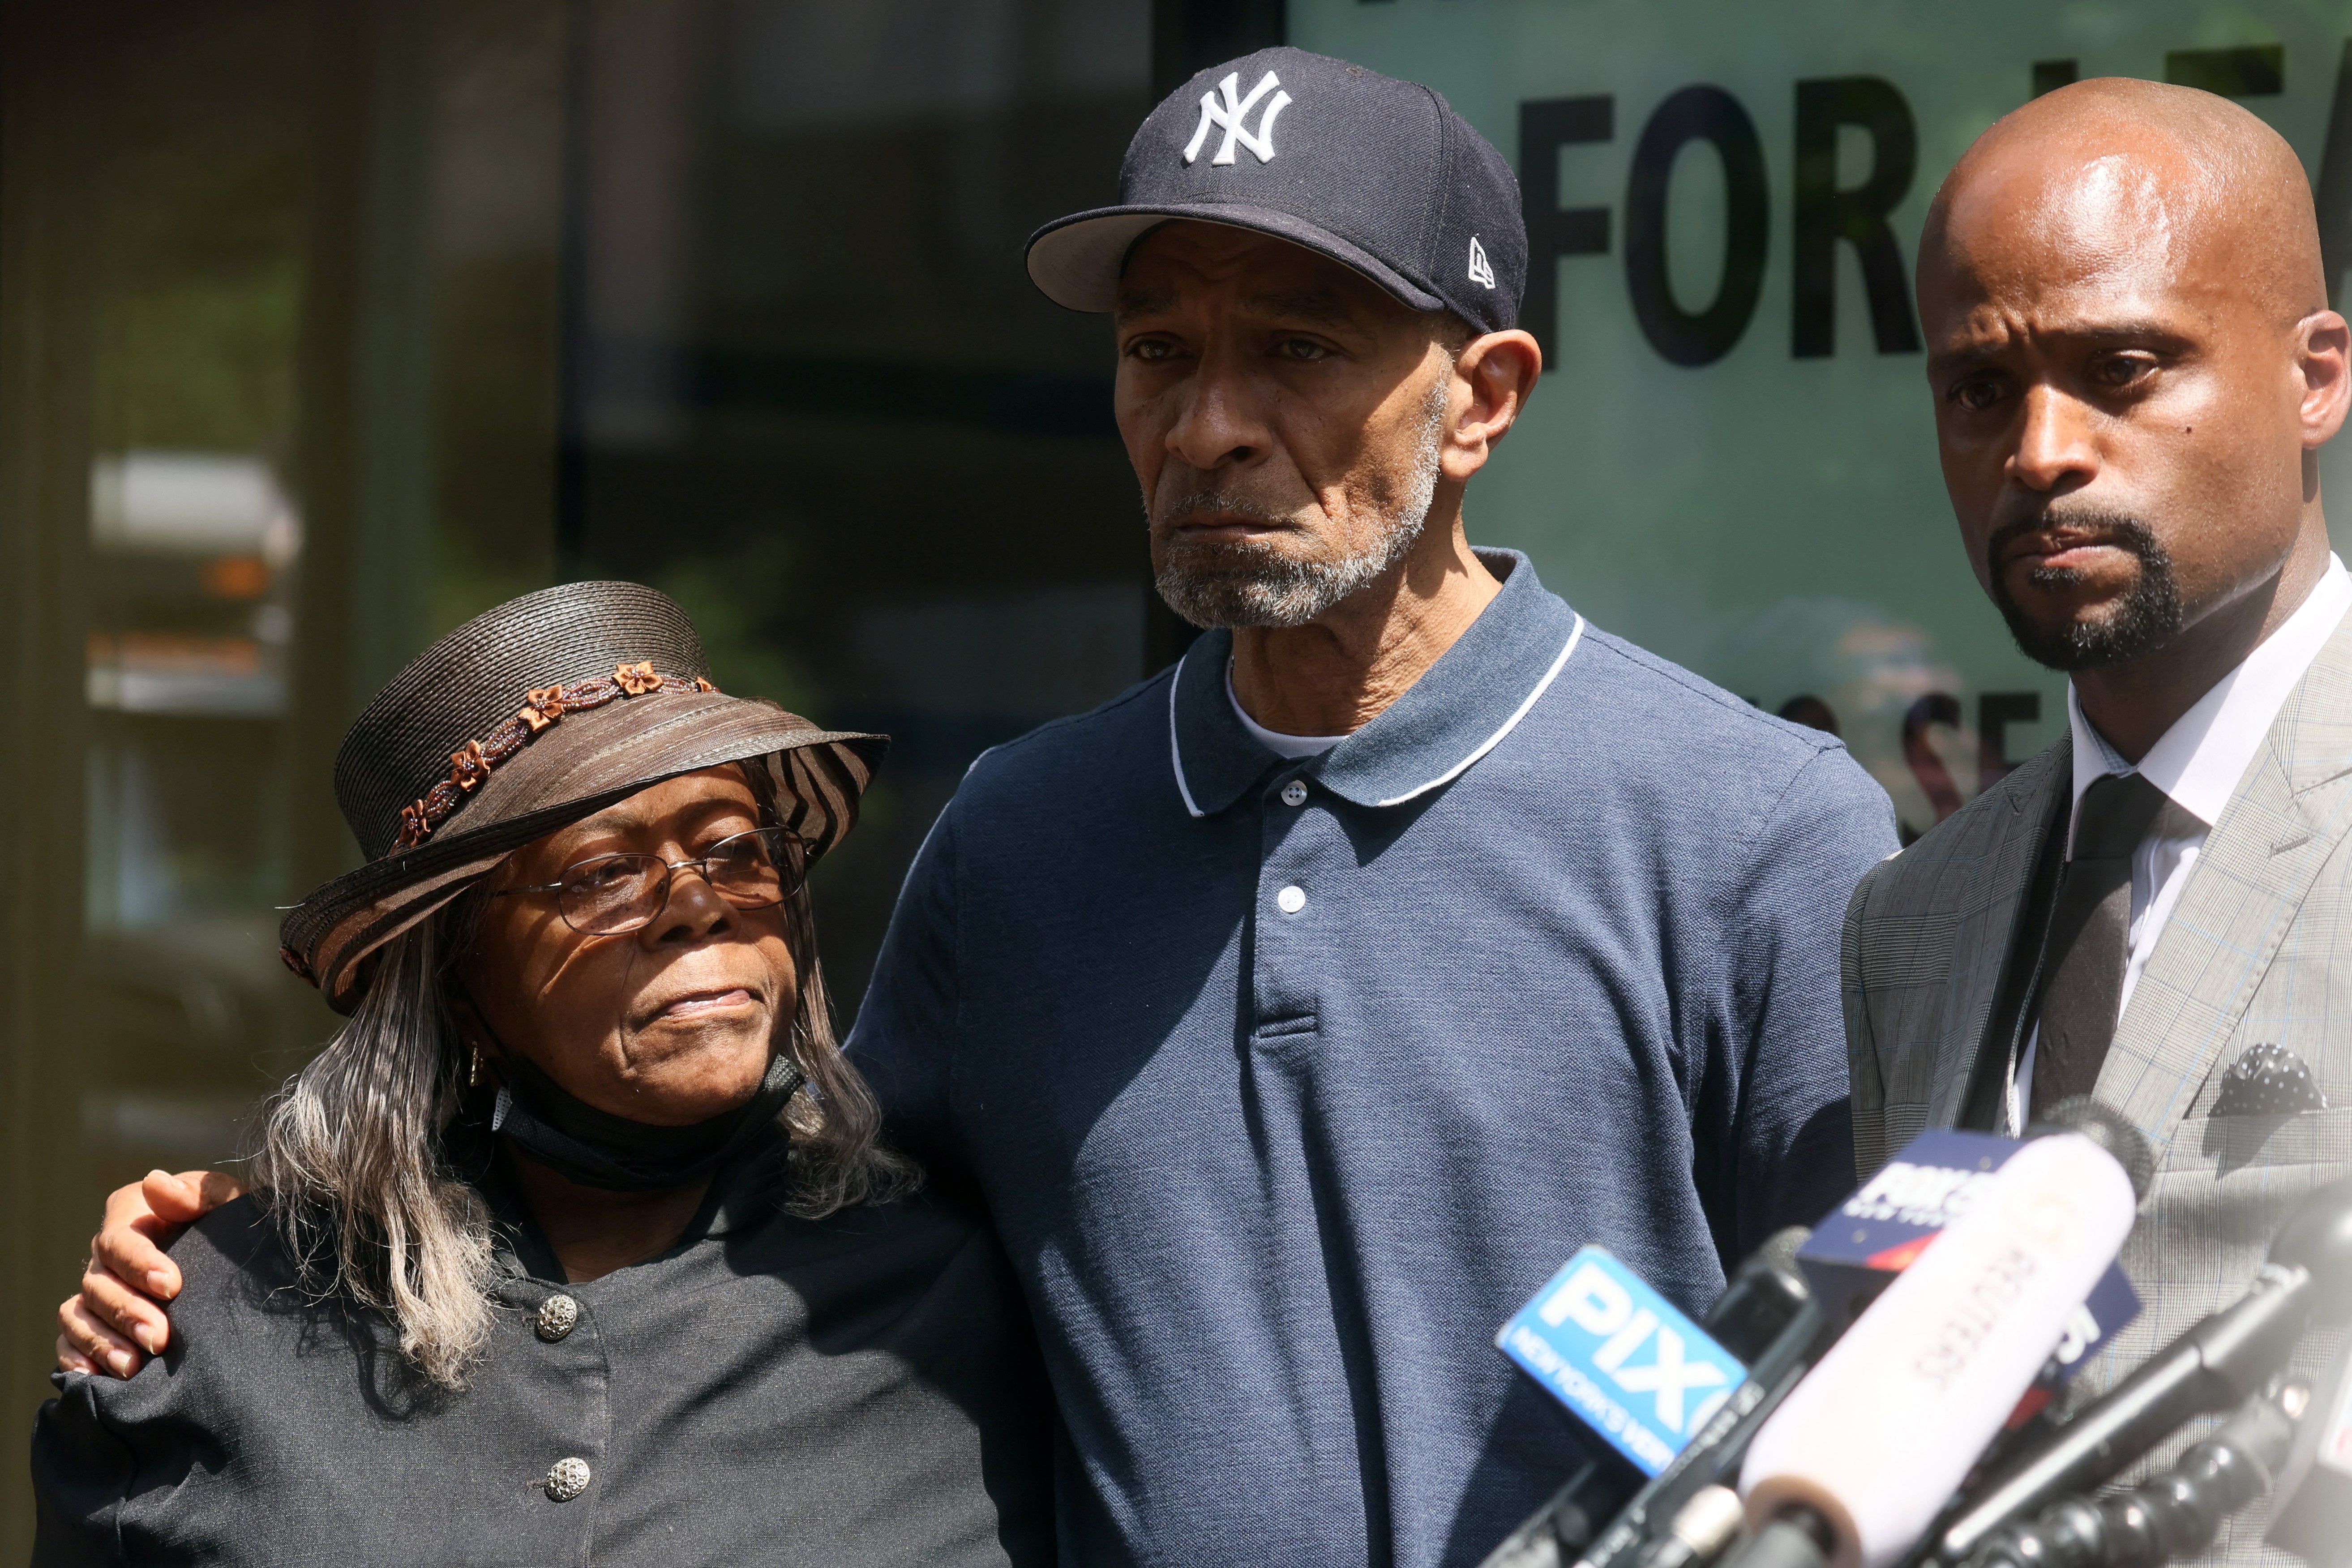 Attorney Donte Mills, right, appeared with Mildred Mahazu and Andre Zachery, the aunt and father of Jordan Neely, respectively, at a press conference on 12 May.